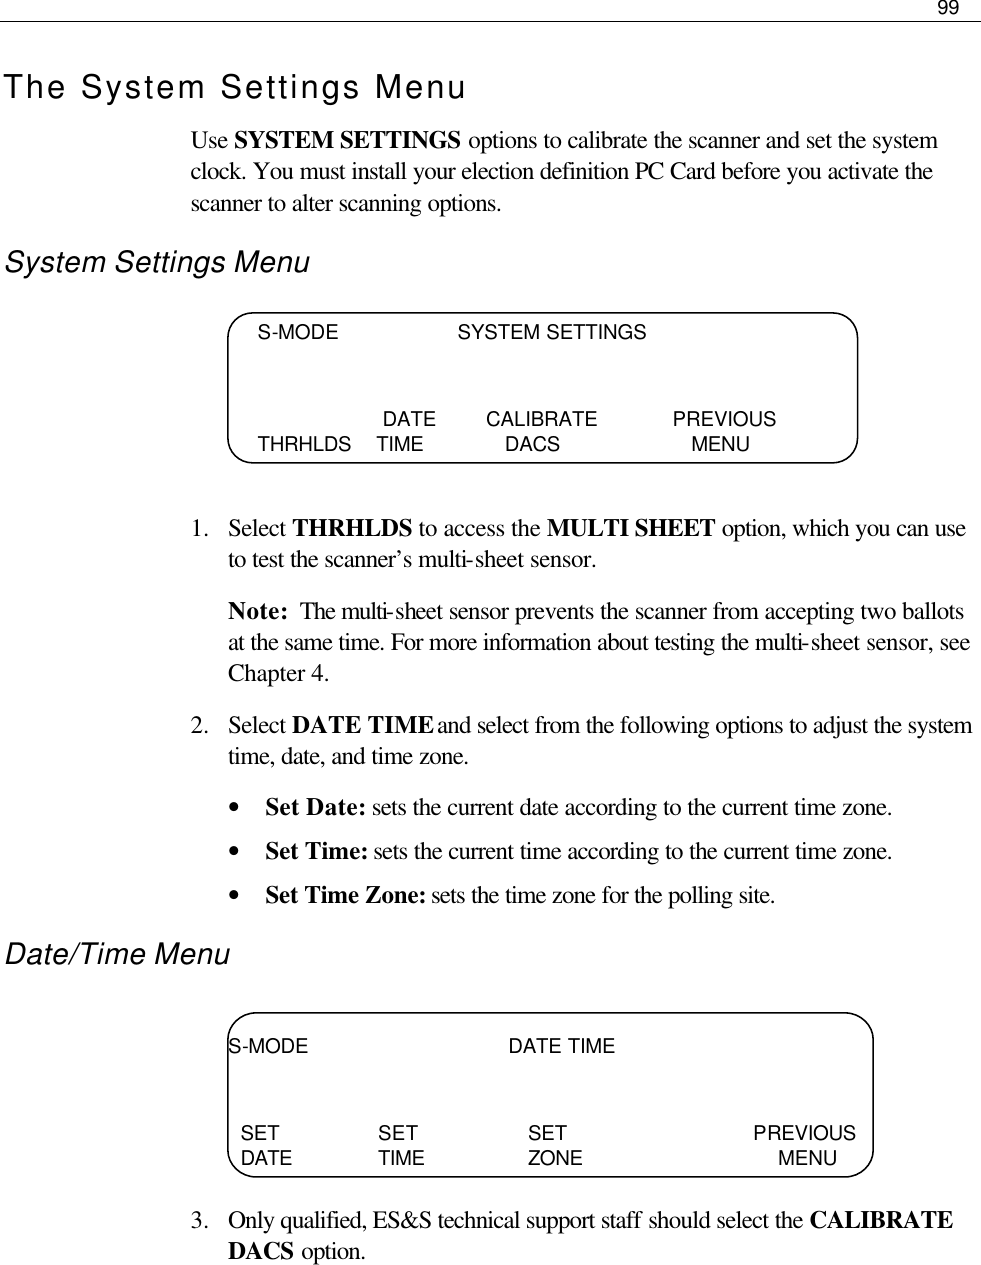     99  The System Settings Menu Use SYSTEM SETTINGS options to calibrate the scanner and set the system clock. You must install your election definition PC Card before you activate the scanner to alter scanning options.  System Settings Menu     1.  Select THRHLDS to access the MULTI SHEET option, which you can use to test the scanner’s multi-sheet sensor.  Note:  The multi-sheet sensor prevents the scanner from accepting two ballots at the same time. For more information about testing the multi-sheet sensor, see Chapter 4. 2.  Select DATE TIME and select from the following options to adjust the system time, date, and time zone.  • Set Date: sets the current date according to the current time zone. • Set Time: sets the current time according to the current time zone. • Set Time Zone: sets the time zone for the polling site. Date/Time Menu     3.  Only qualified, ES&amp;S technical support staff should select the CALIBRATE DACS option.   S-MODE                   SYSTEM SETTINGS                       DATE        CALIBRATE            PREVIOUS        THRHLDS    TIME             DACS                     MENU S-MODE                                DATE TIME     SET      SET    SET     PREVIOUS   DATE   TIME    ZONE             MENU 